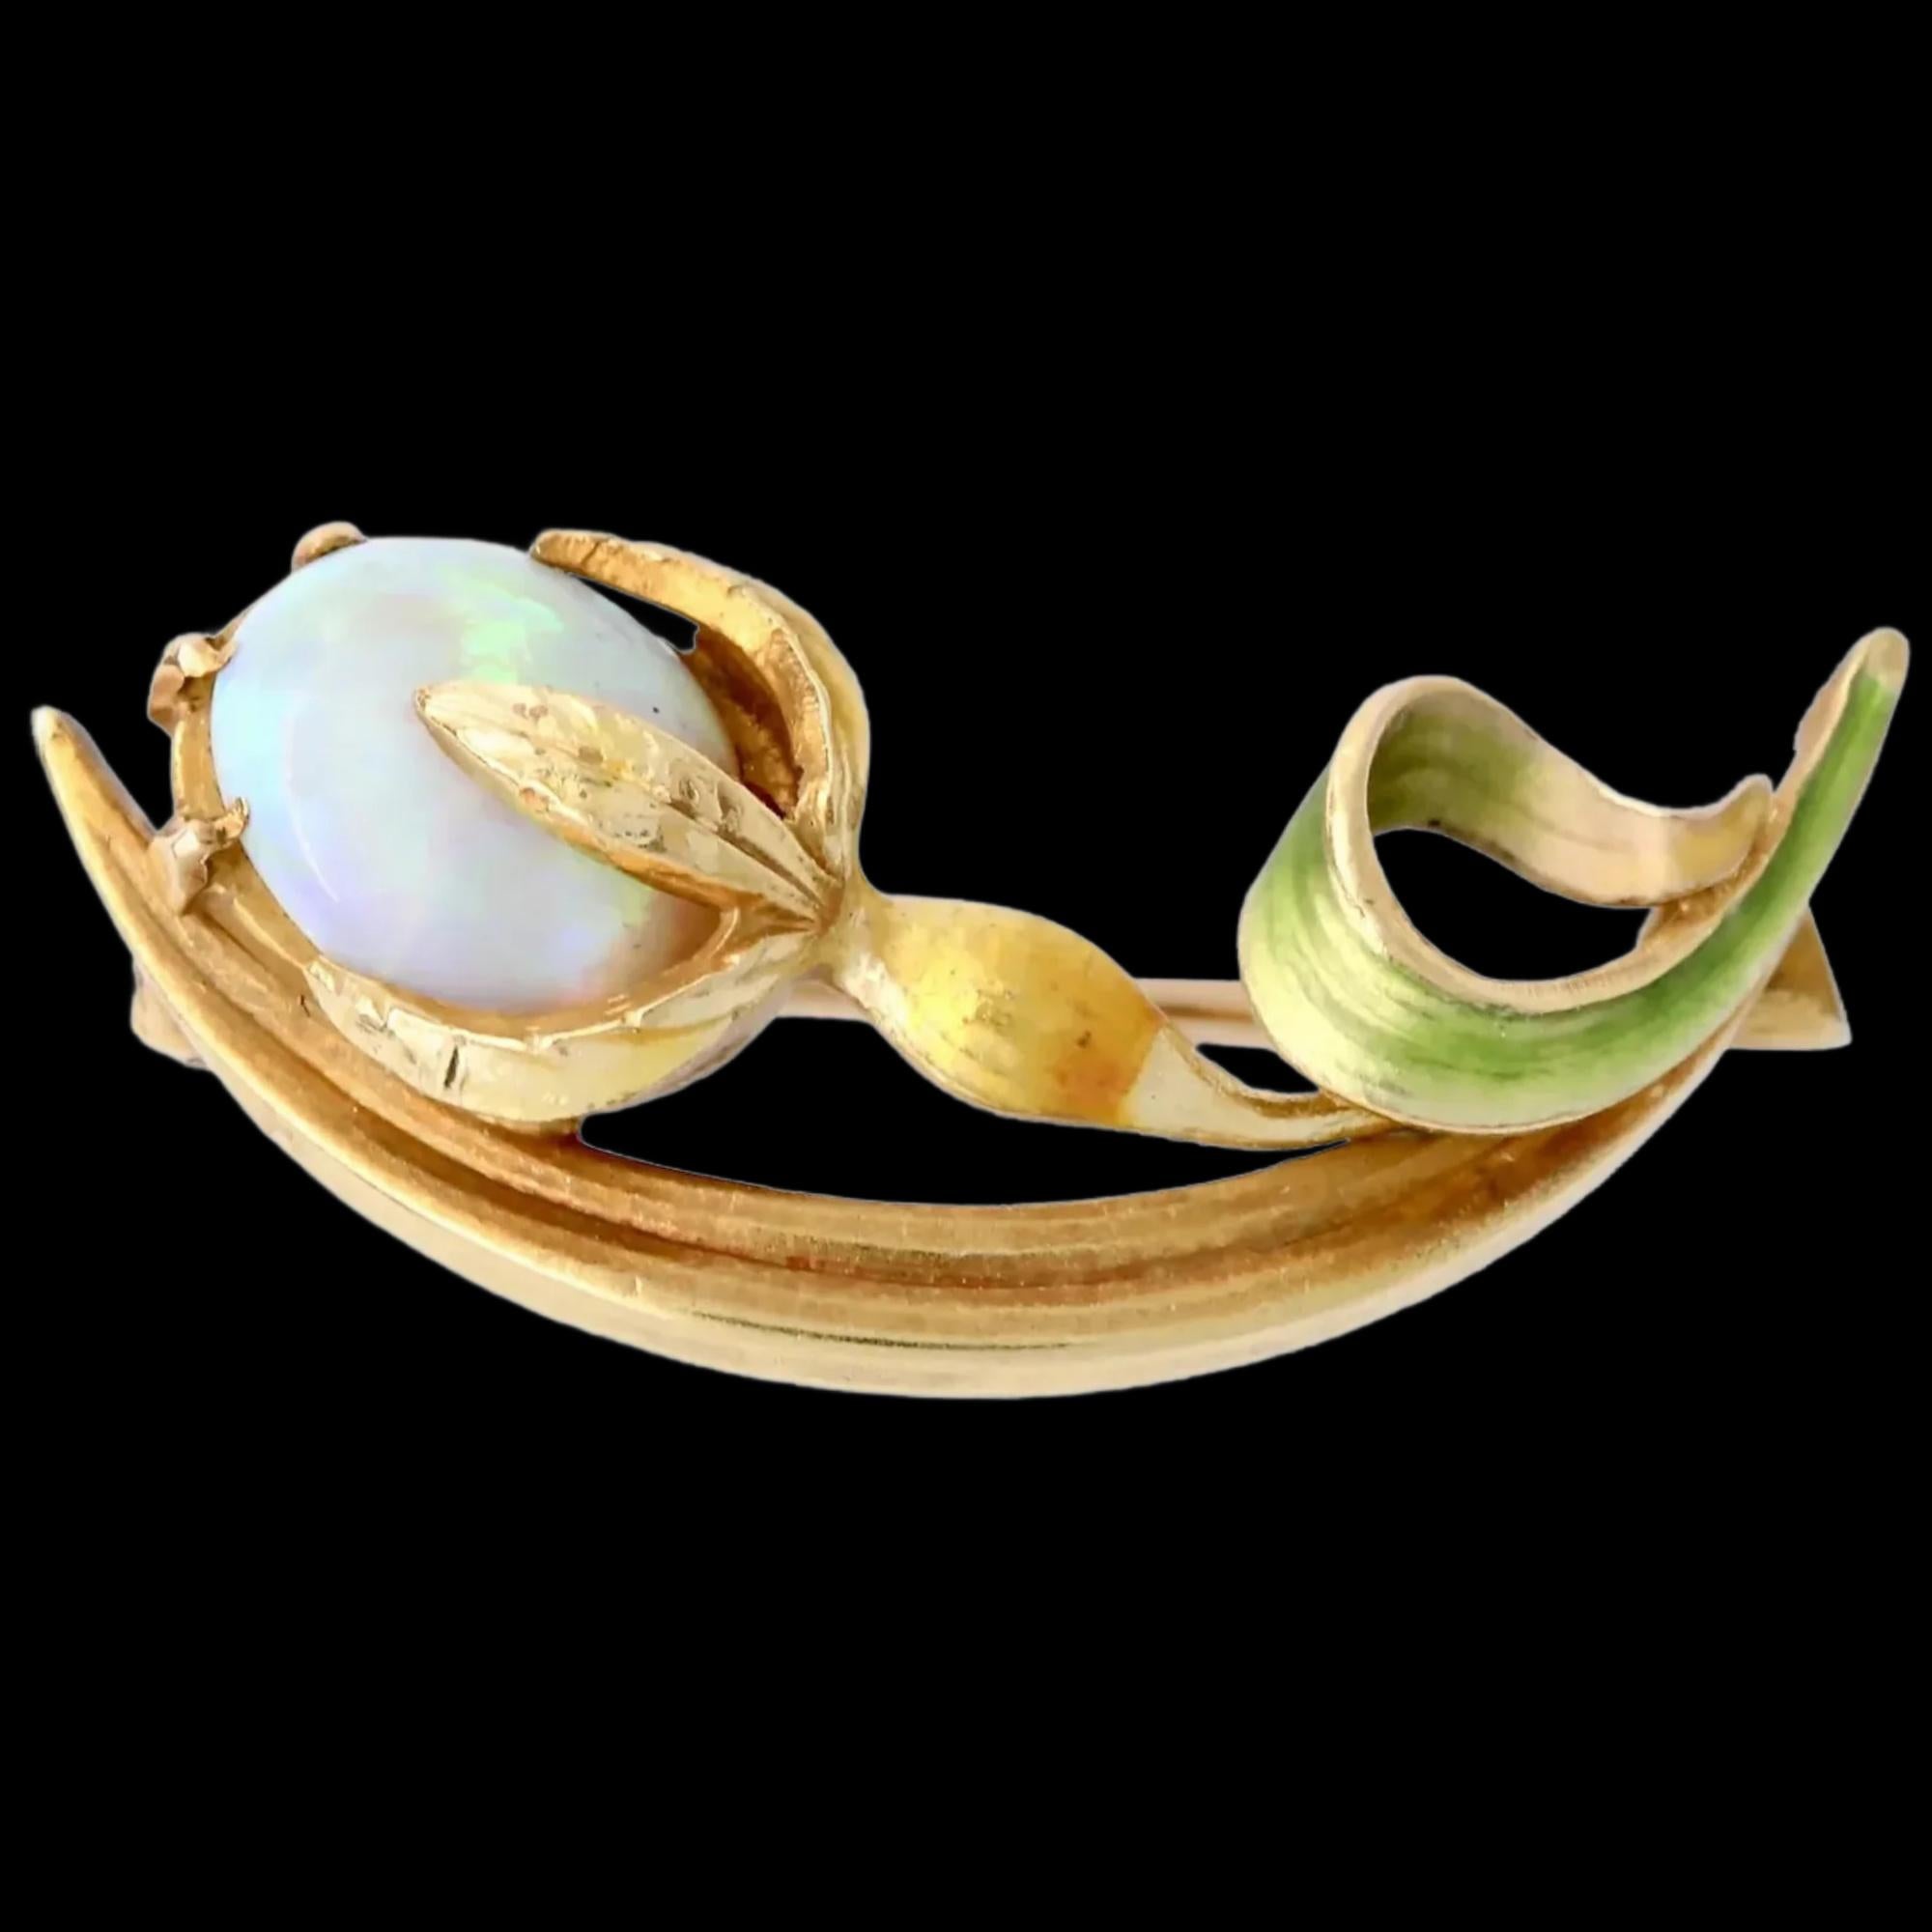 
A handmade art nouveau period enameled flower brooch centered by an Australian opal.

The leaves, and stem of flower enameled in green and golden translucent enamel.

Hallmarked as 14 Karat gold, with Krementz signature.

Measurements: 1